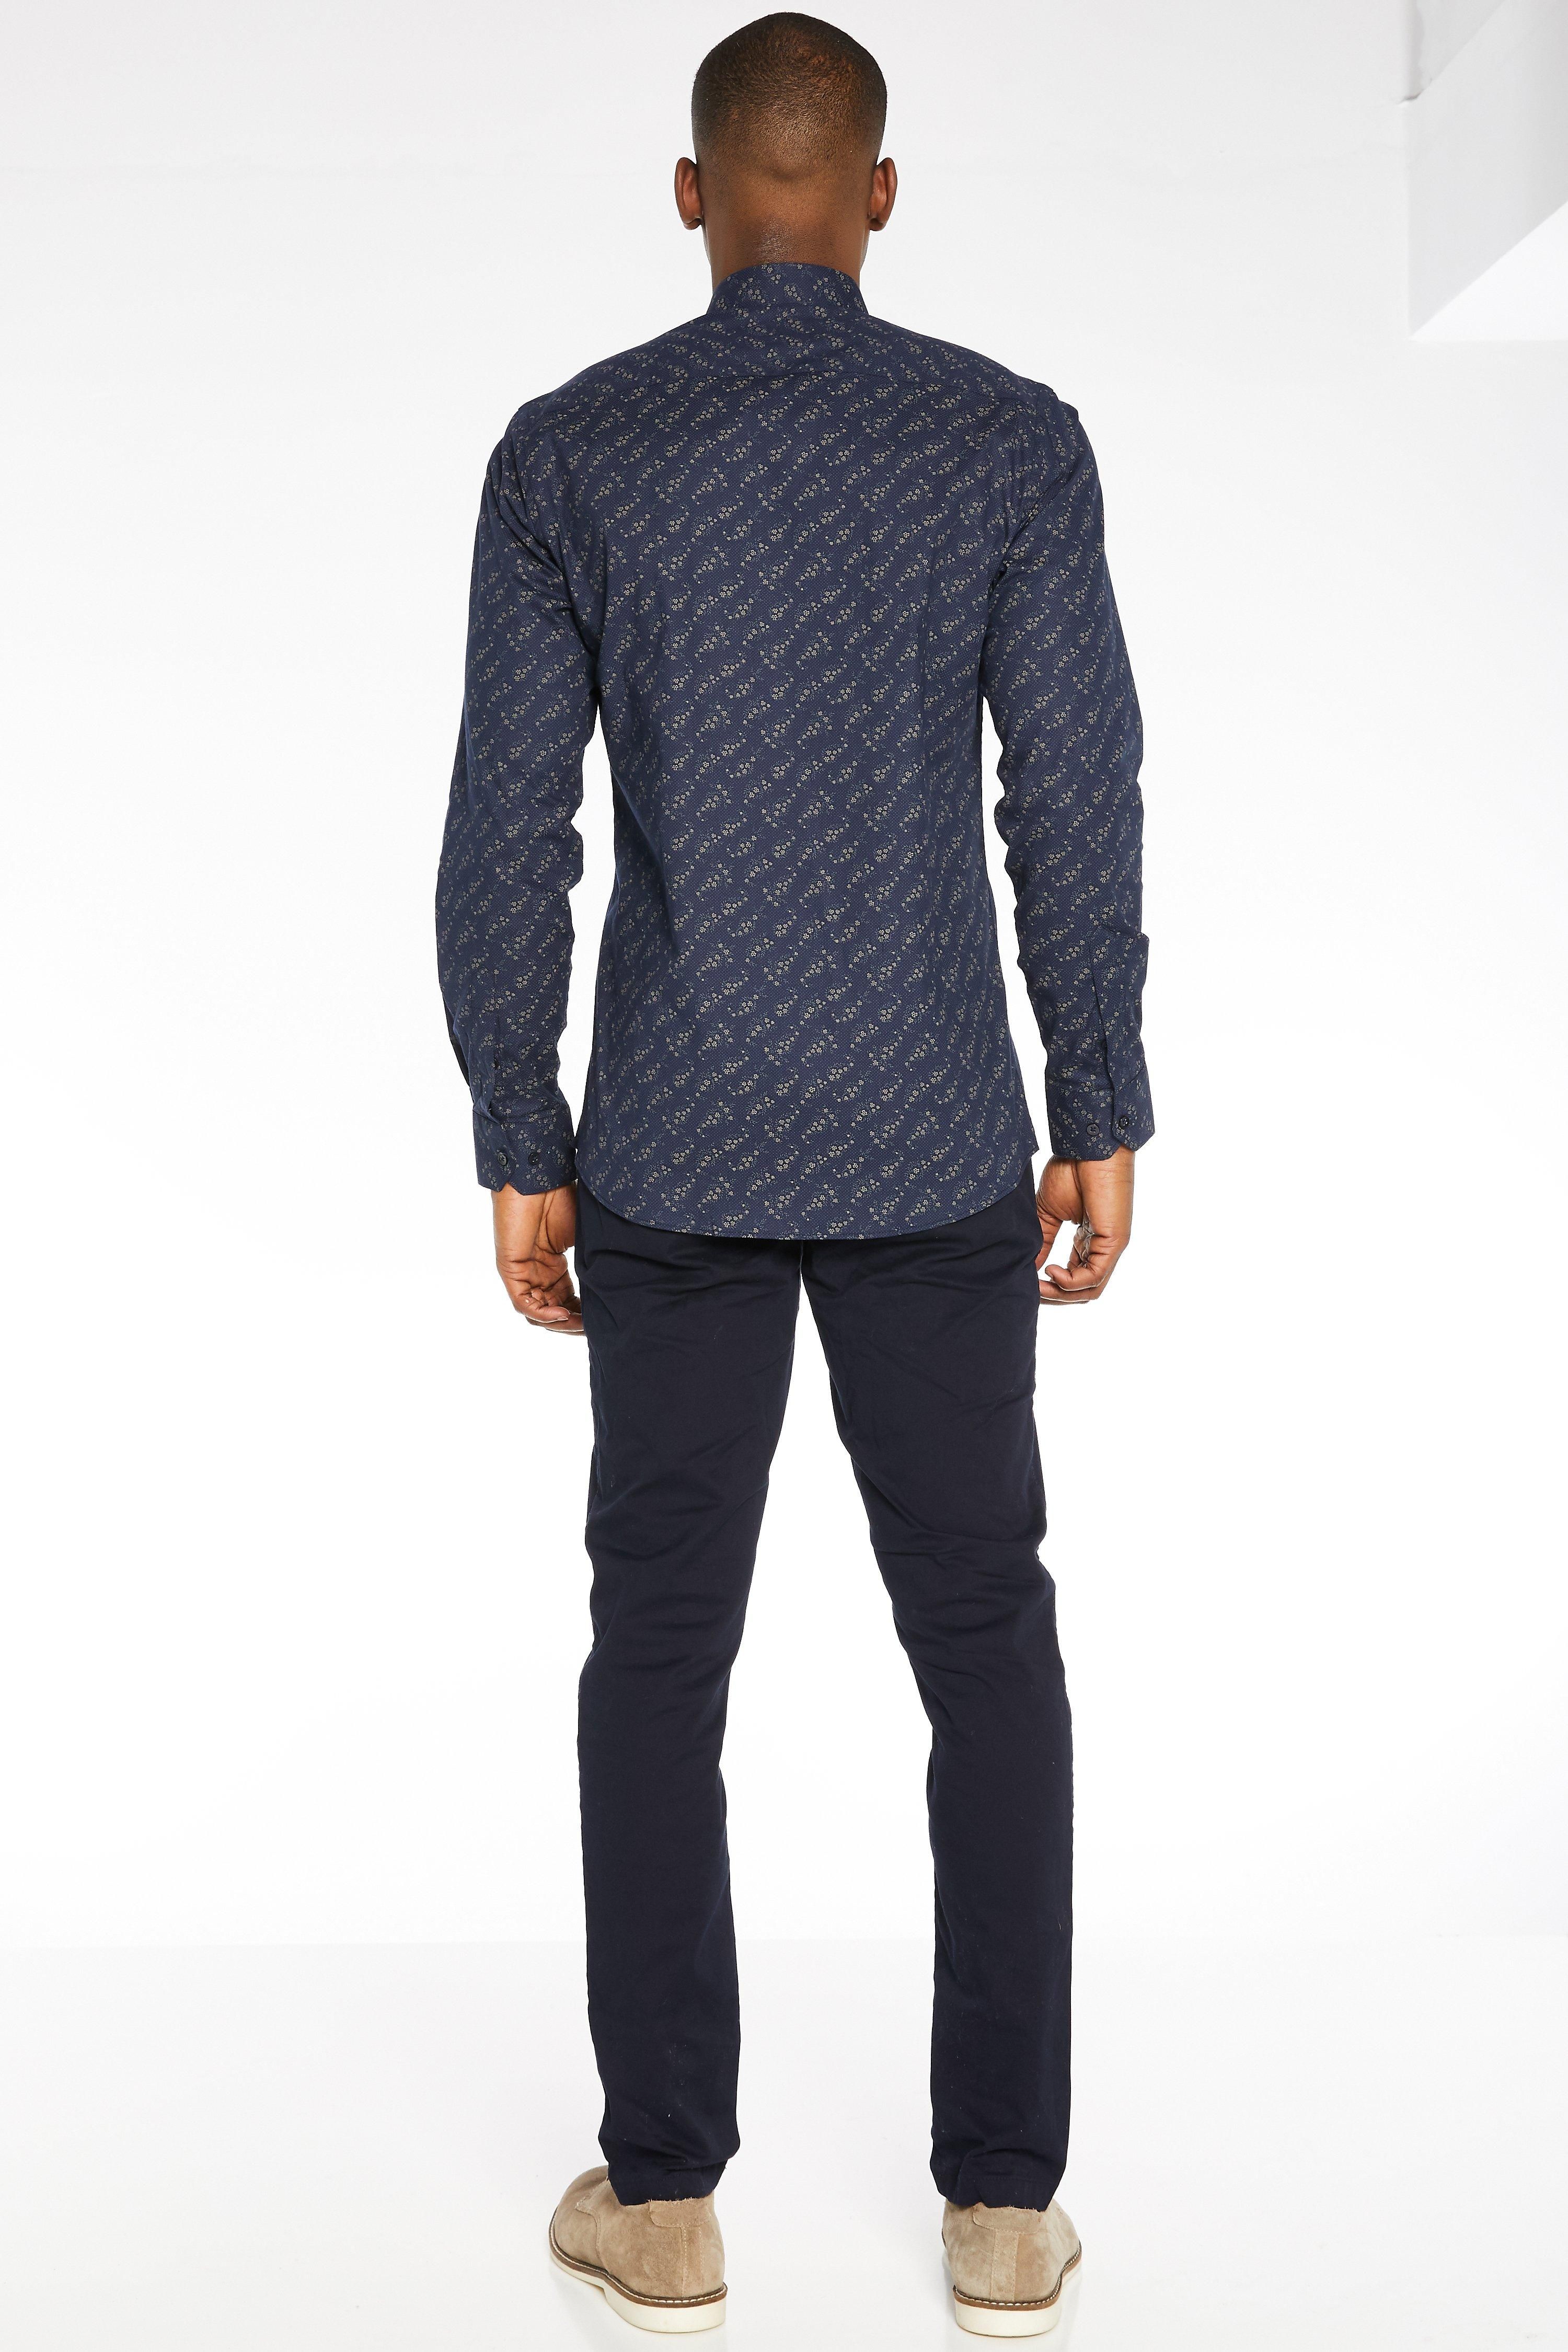 - Slim Fit  - Long Sleeved  - Floral Leaf Print  - Classic Collar  - Button Through Fastening